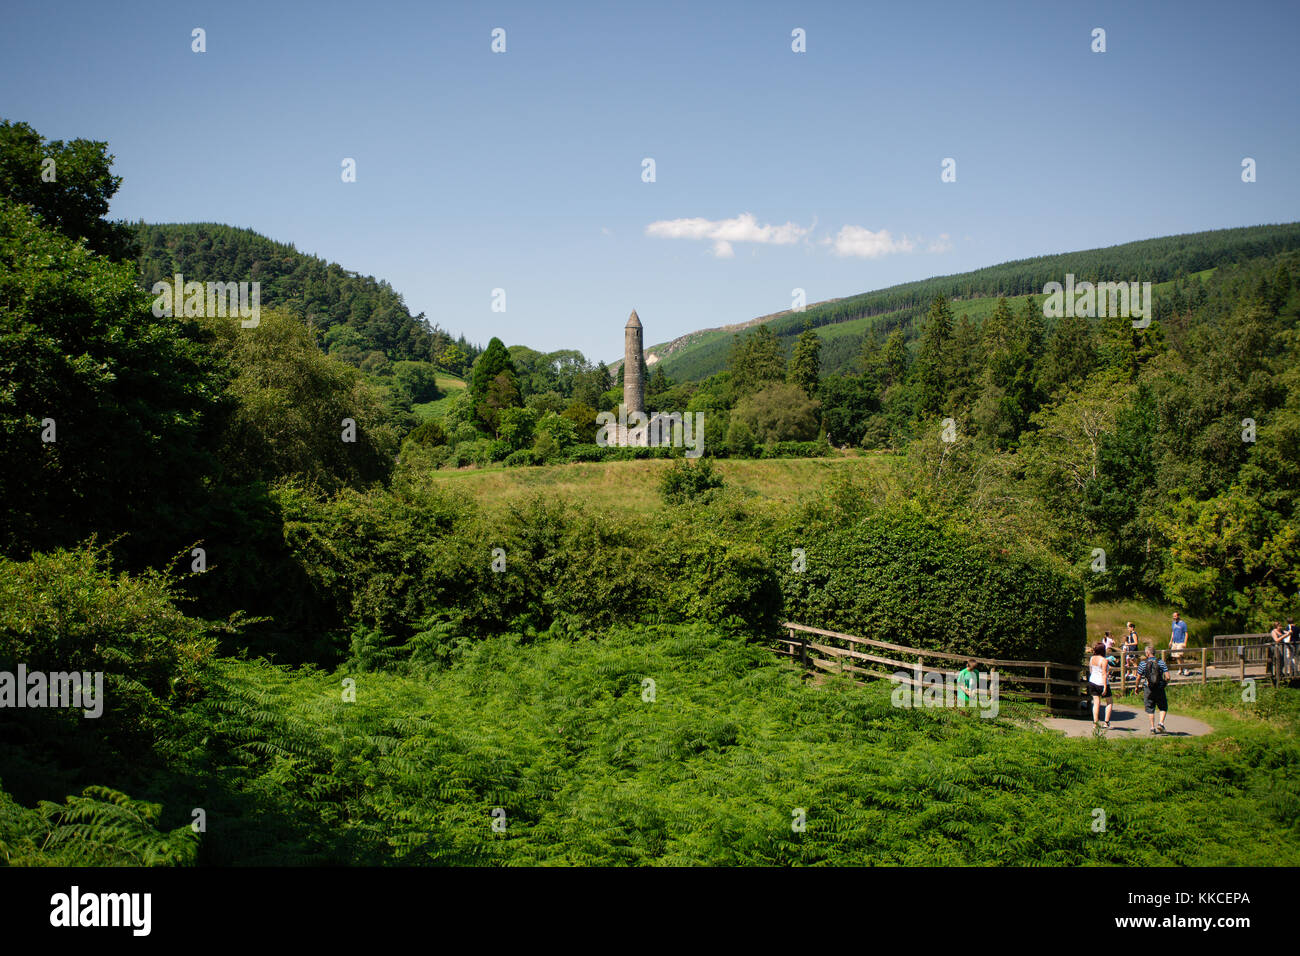 Tourists visiting beautiful Glendalough Lower Valley with view on a Monastic site with round tower. Wicklow Mountain National Park, Ireland Stock Photo